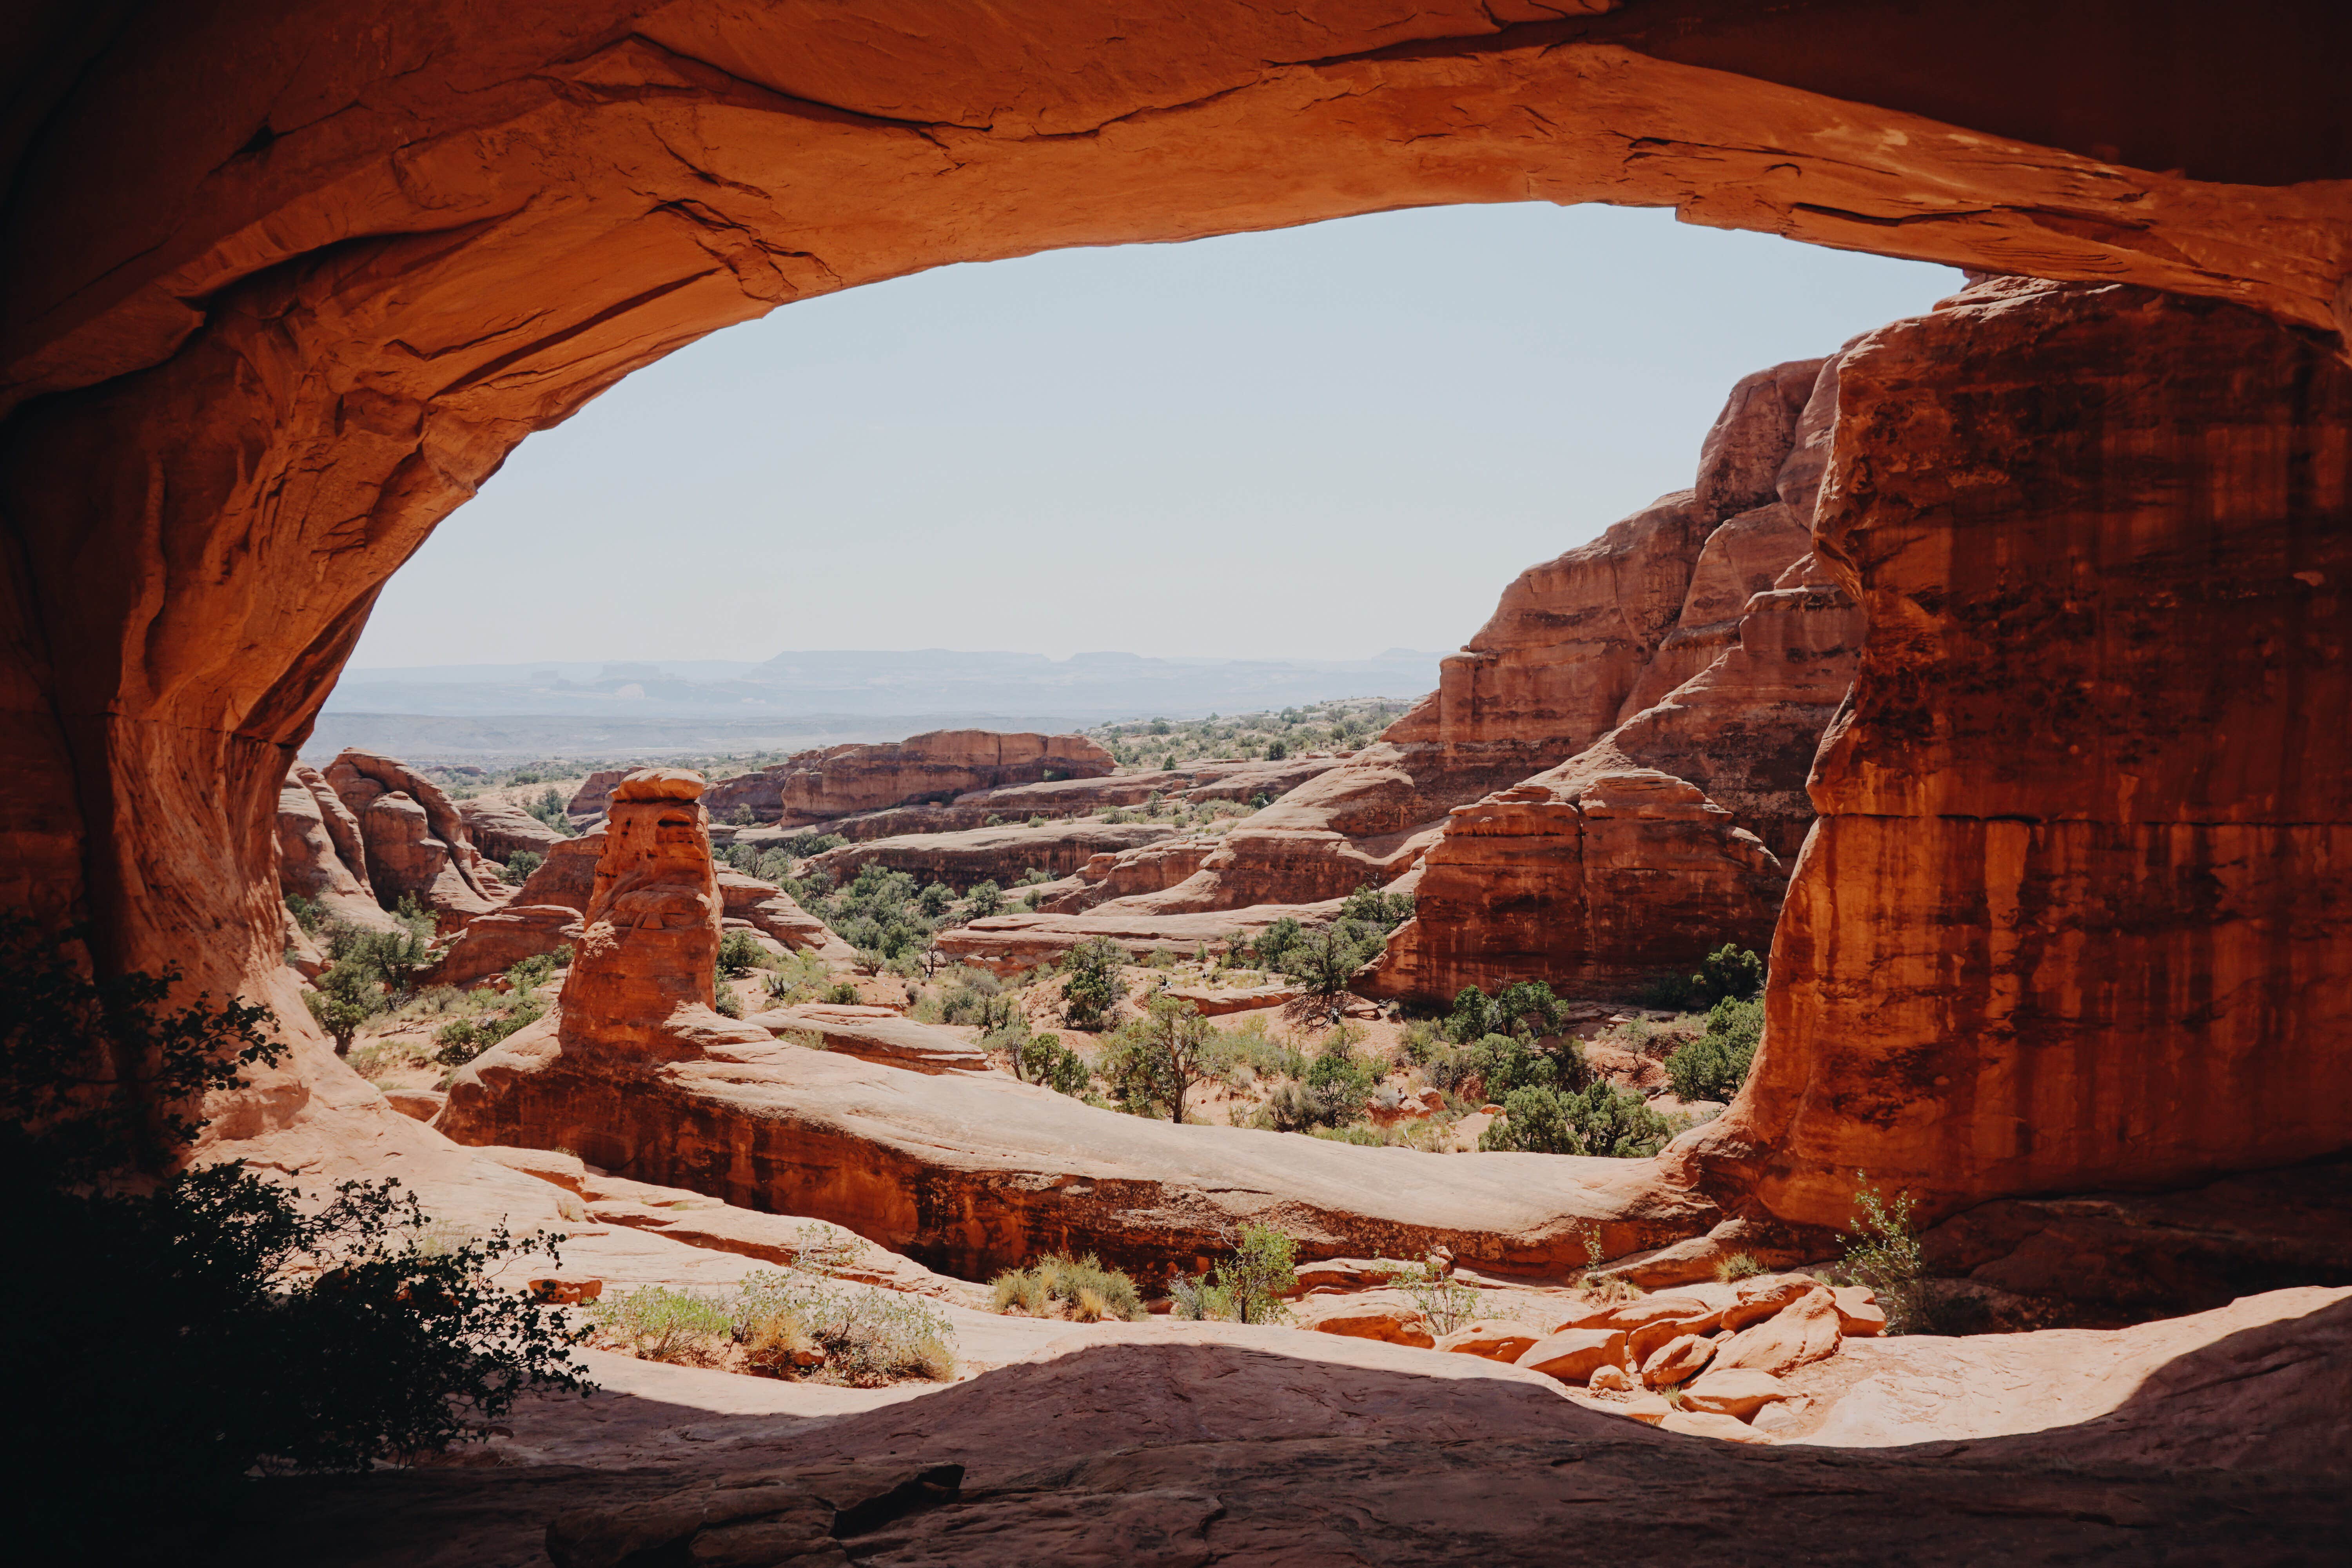 Camper submitted image from White Crack Backcountry Campsites — Canyonlands National Park - 4